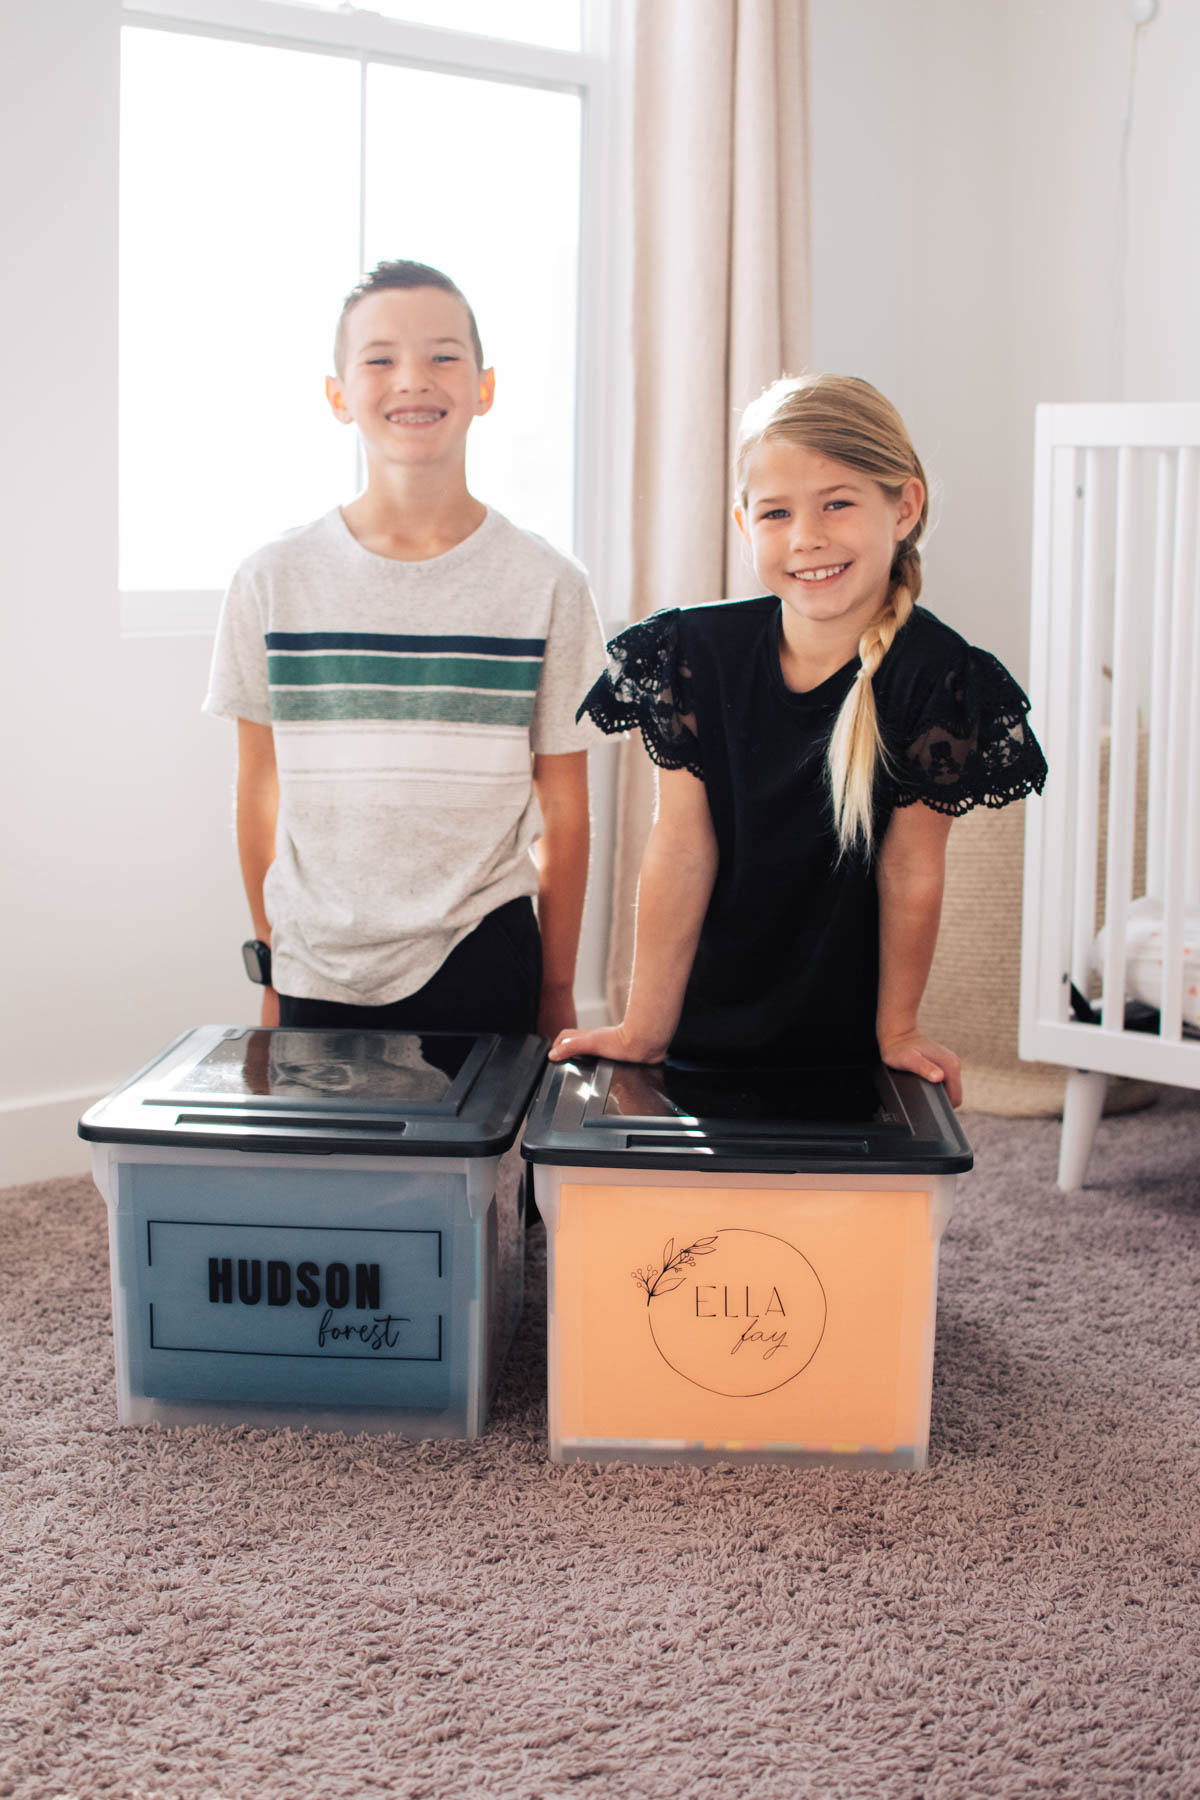 Two children smile while sitting behind their memory box personalized with their name.